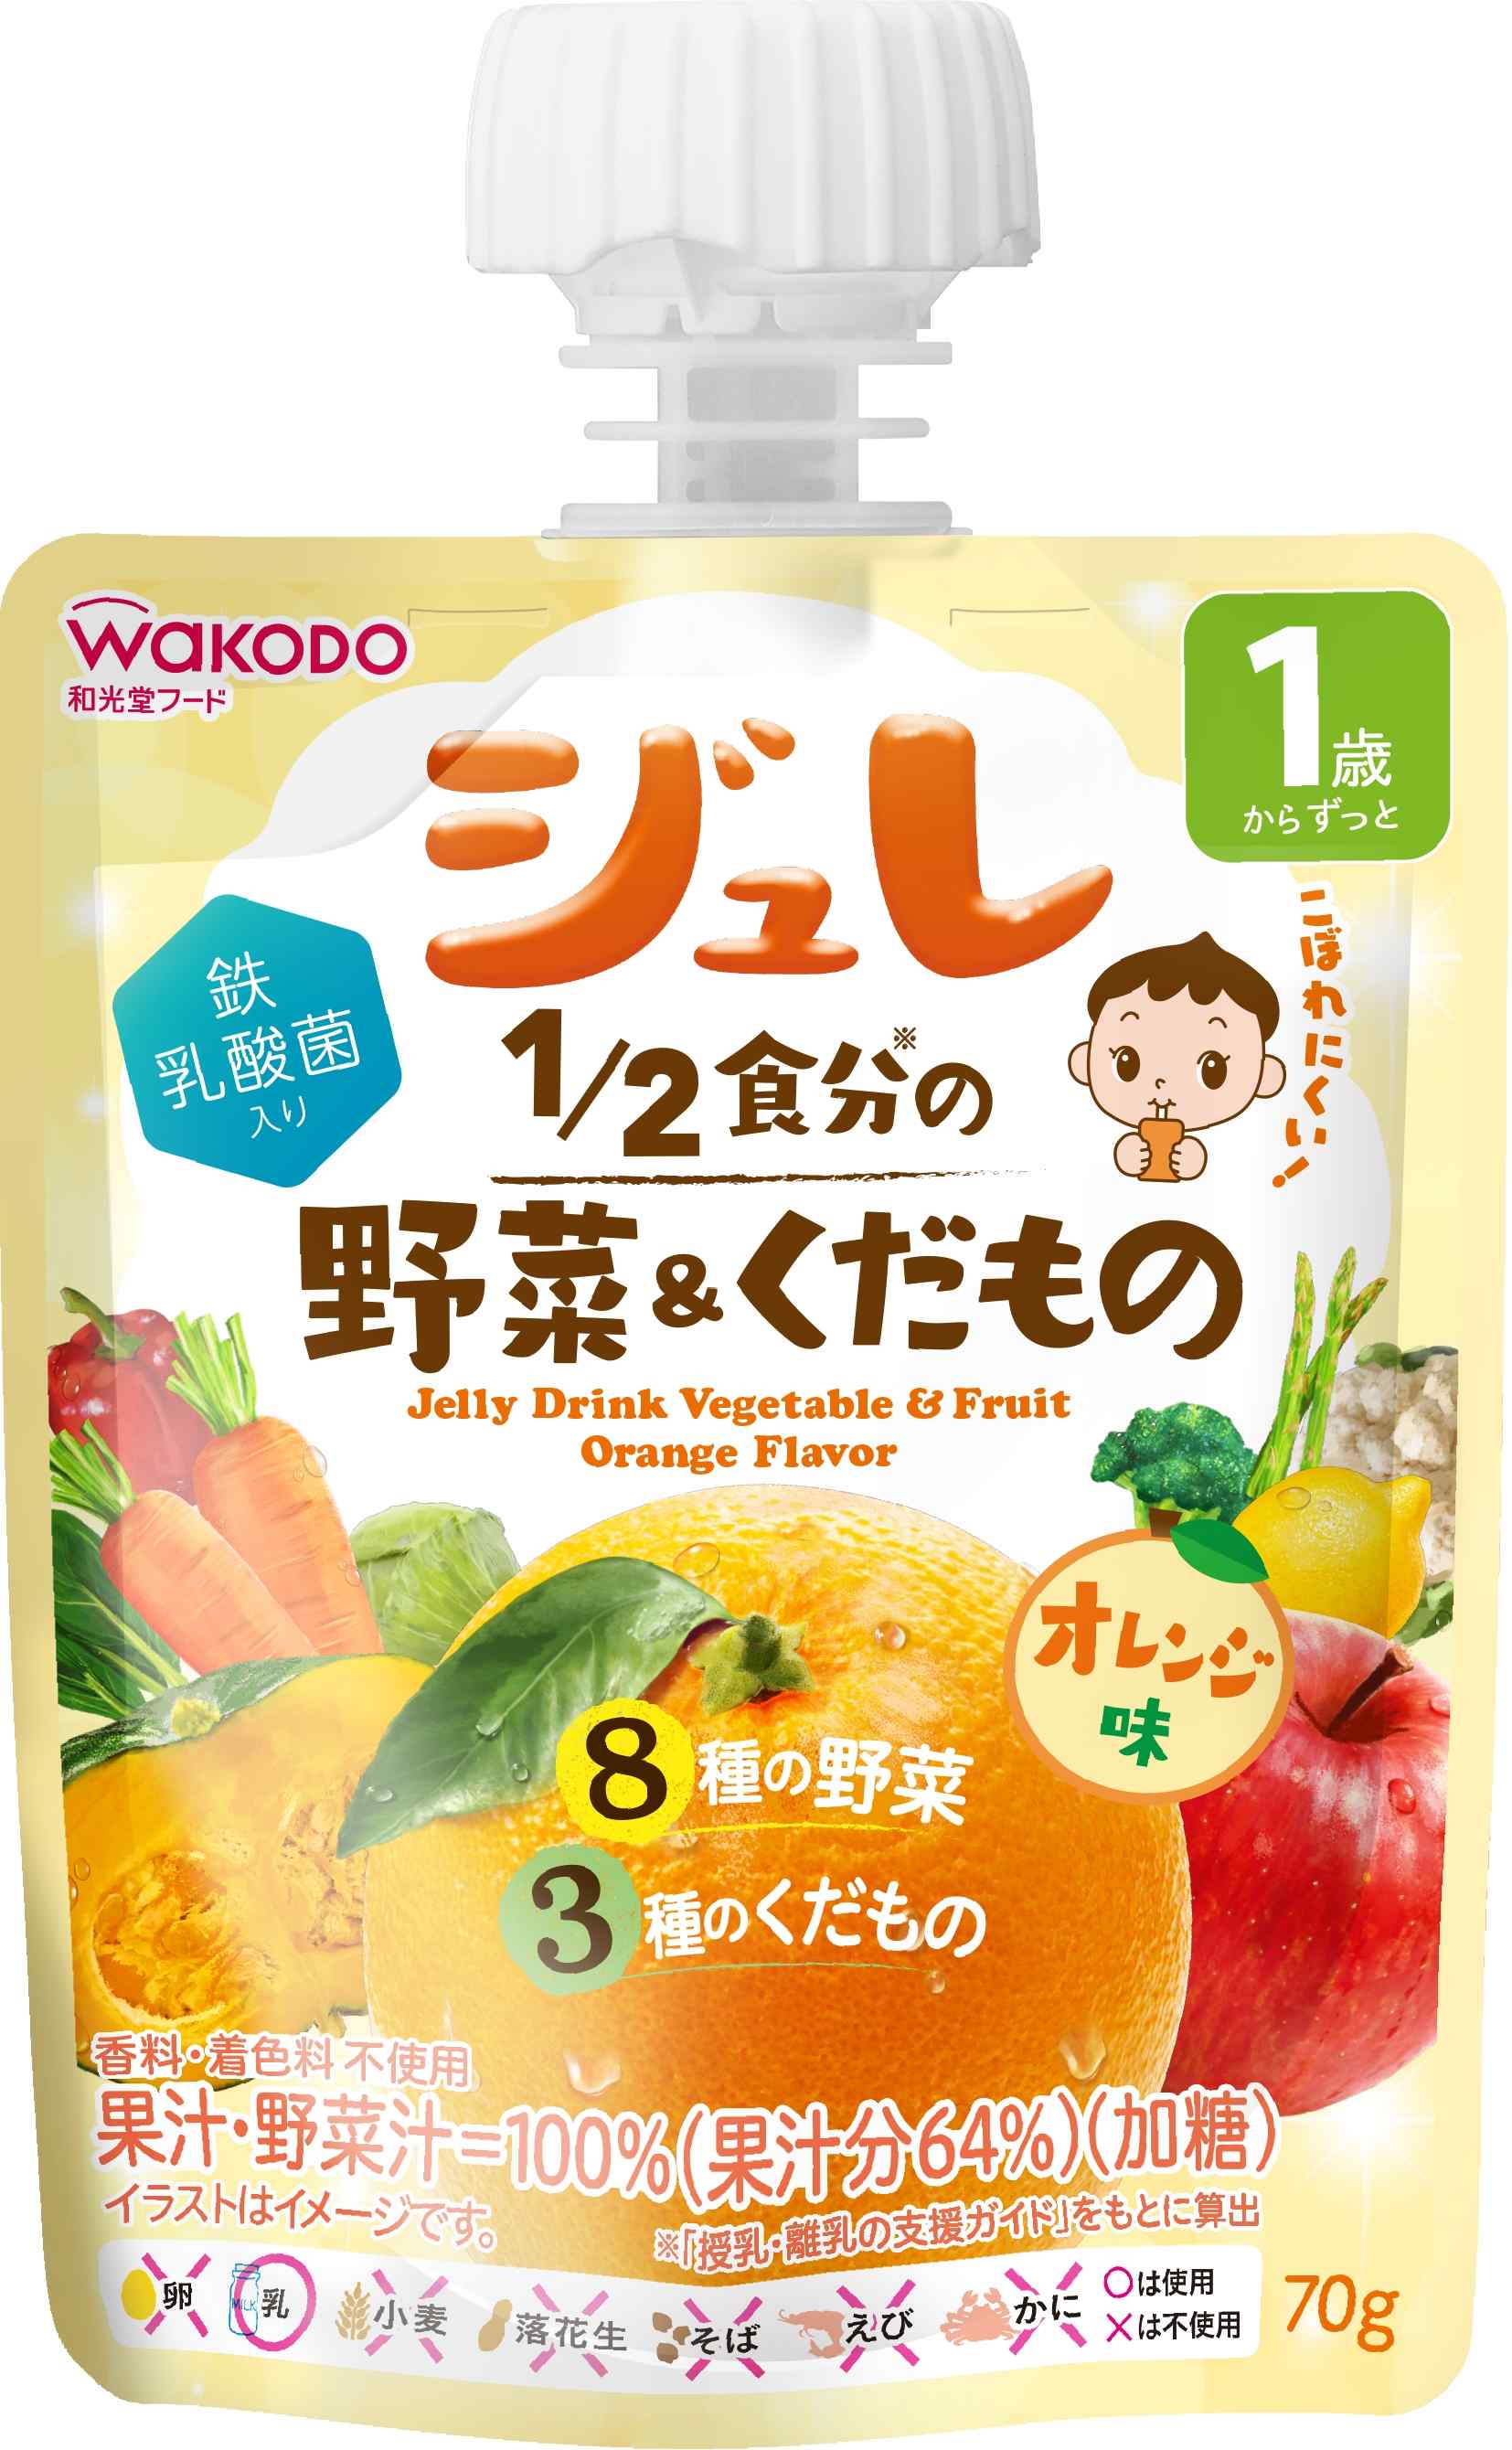 Wakodo My Jelly Drink Vegetable And Orange Flavour (Bundle of 6)